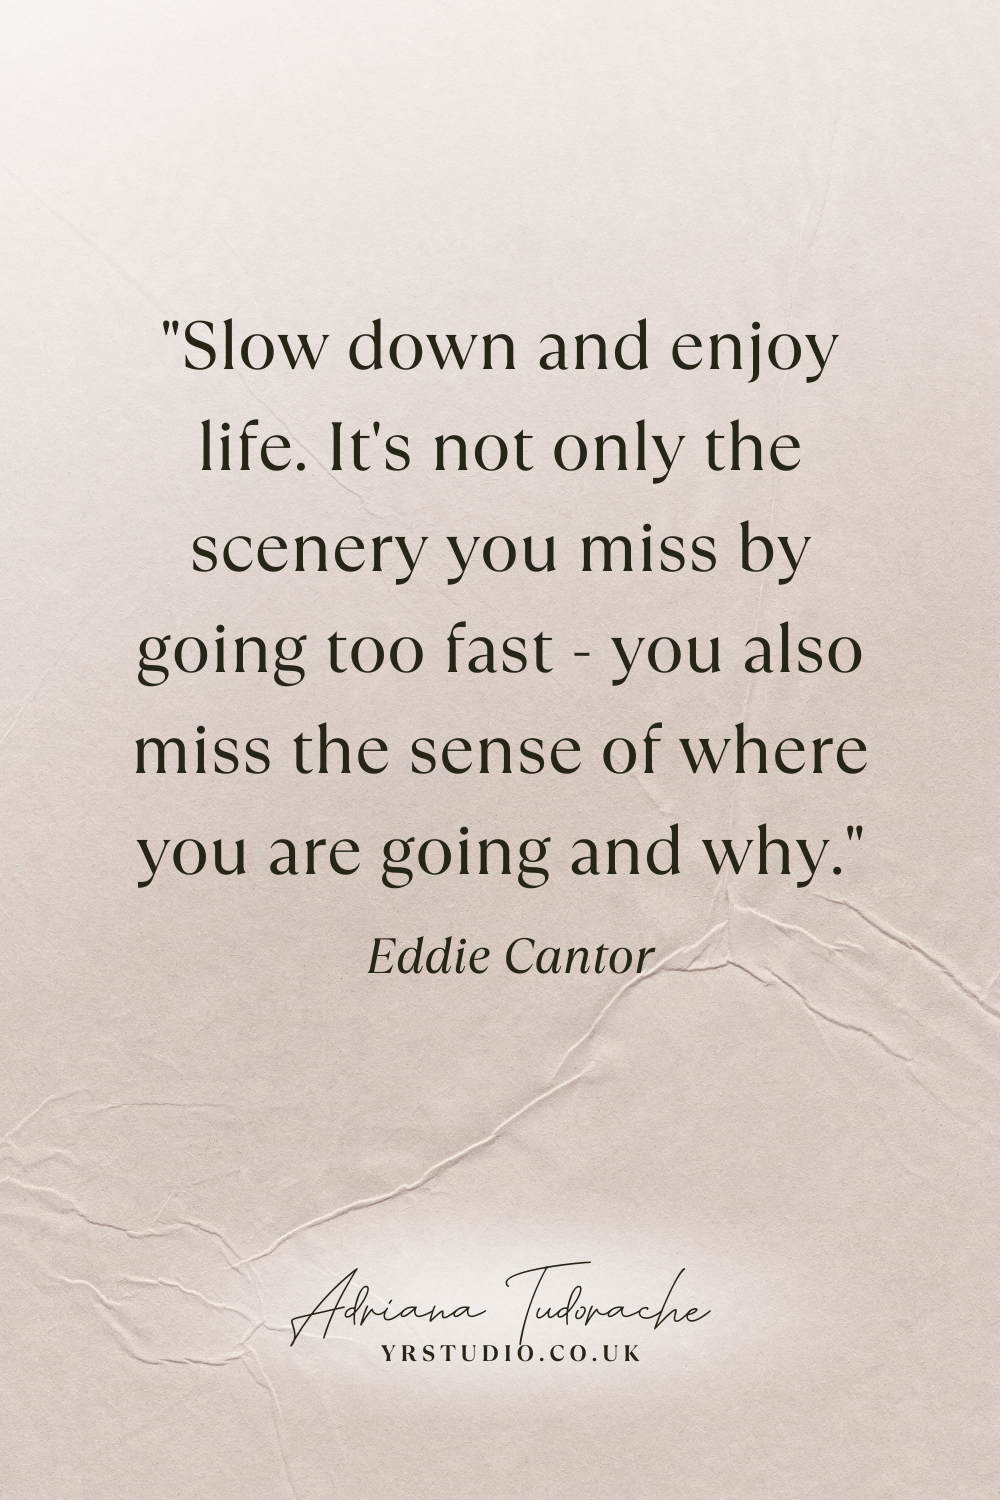 "Slow down and enjoy life. It's not only the scenery you miss by going too fast - you also miss the sense of where you are going and why." - Eddie Cantor